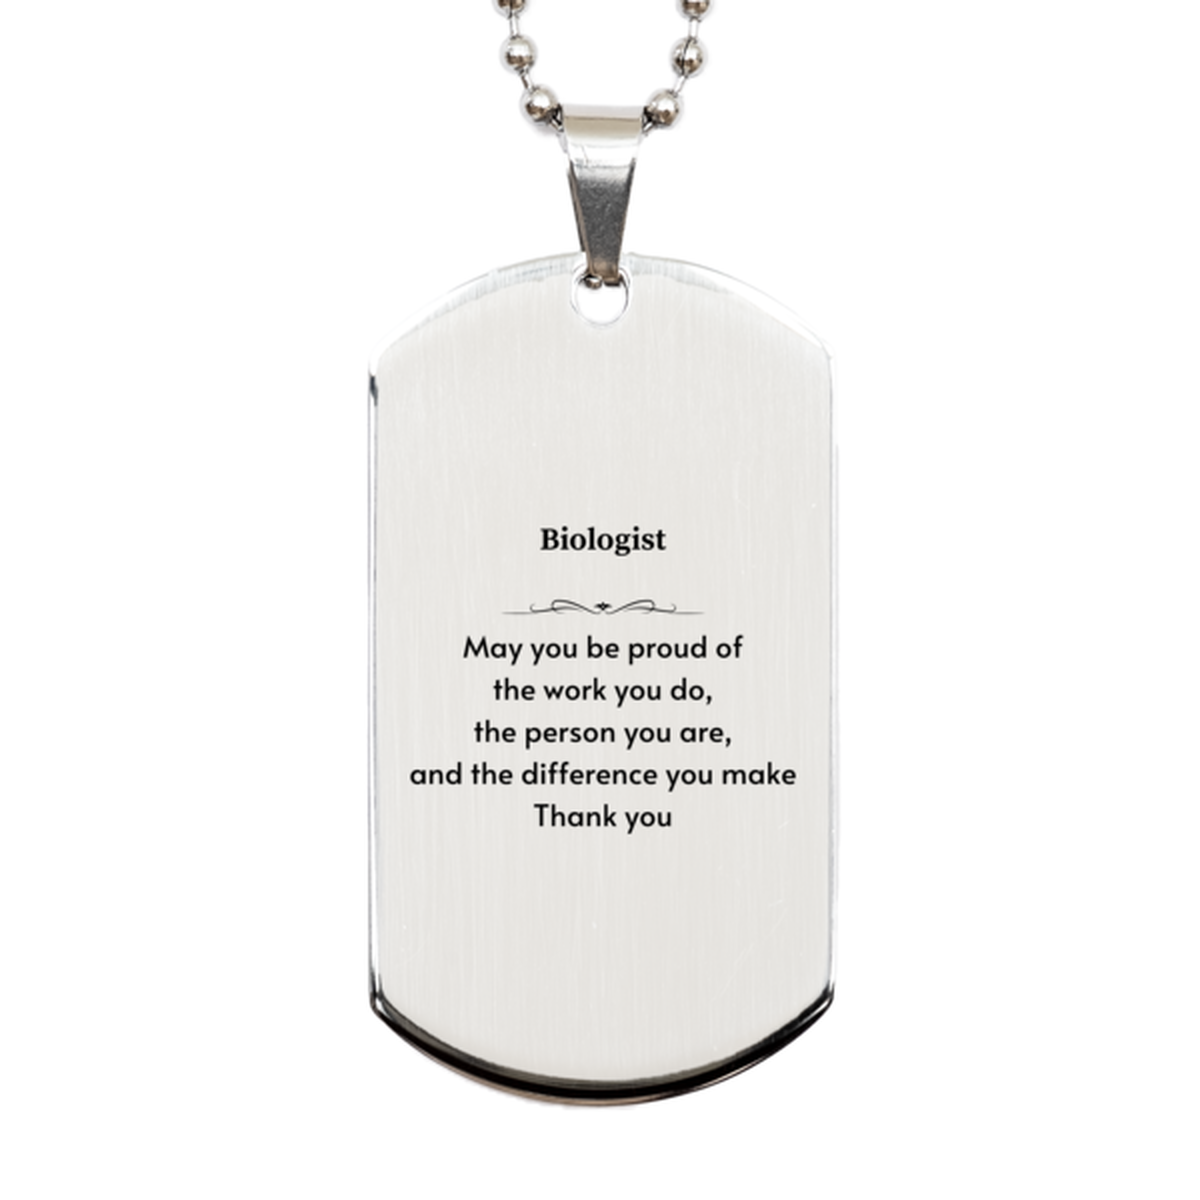 Heartwarming Silver Dog Tag Retirement Coworkers Gifts for Biologist, Biologist May You be proud of the work you do, the person you are Gifts for Boss Men Women Friends